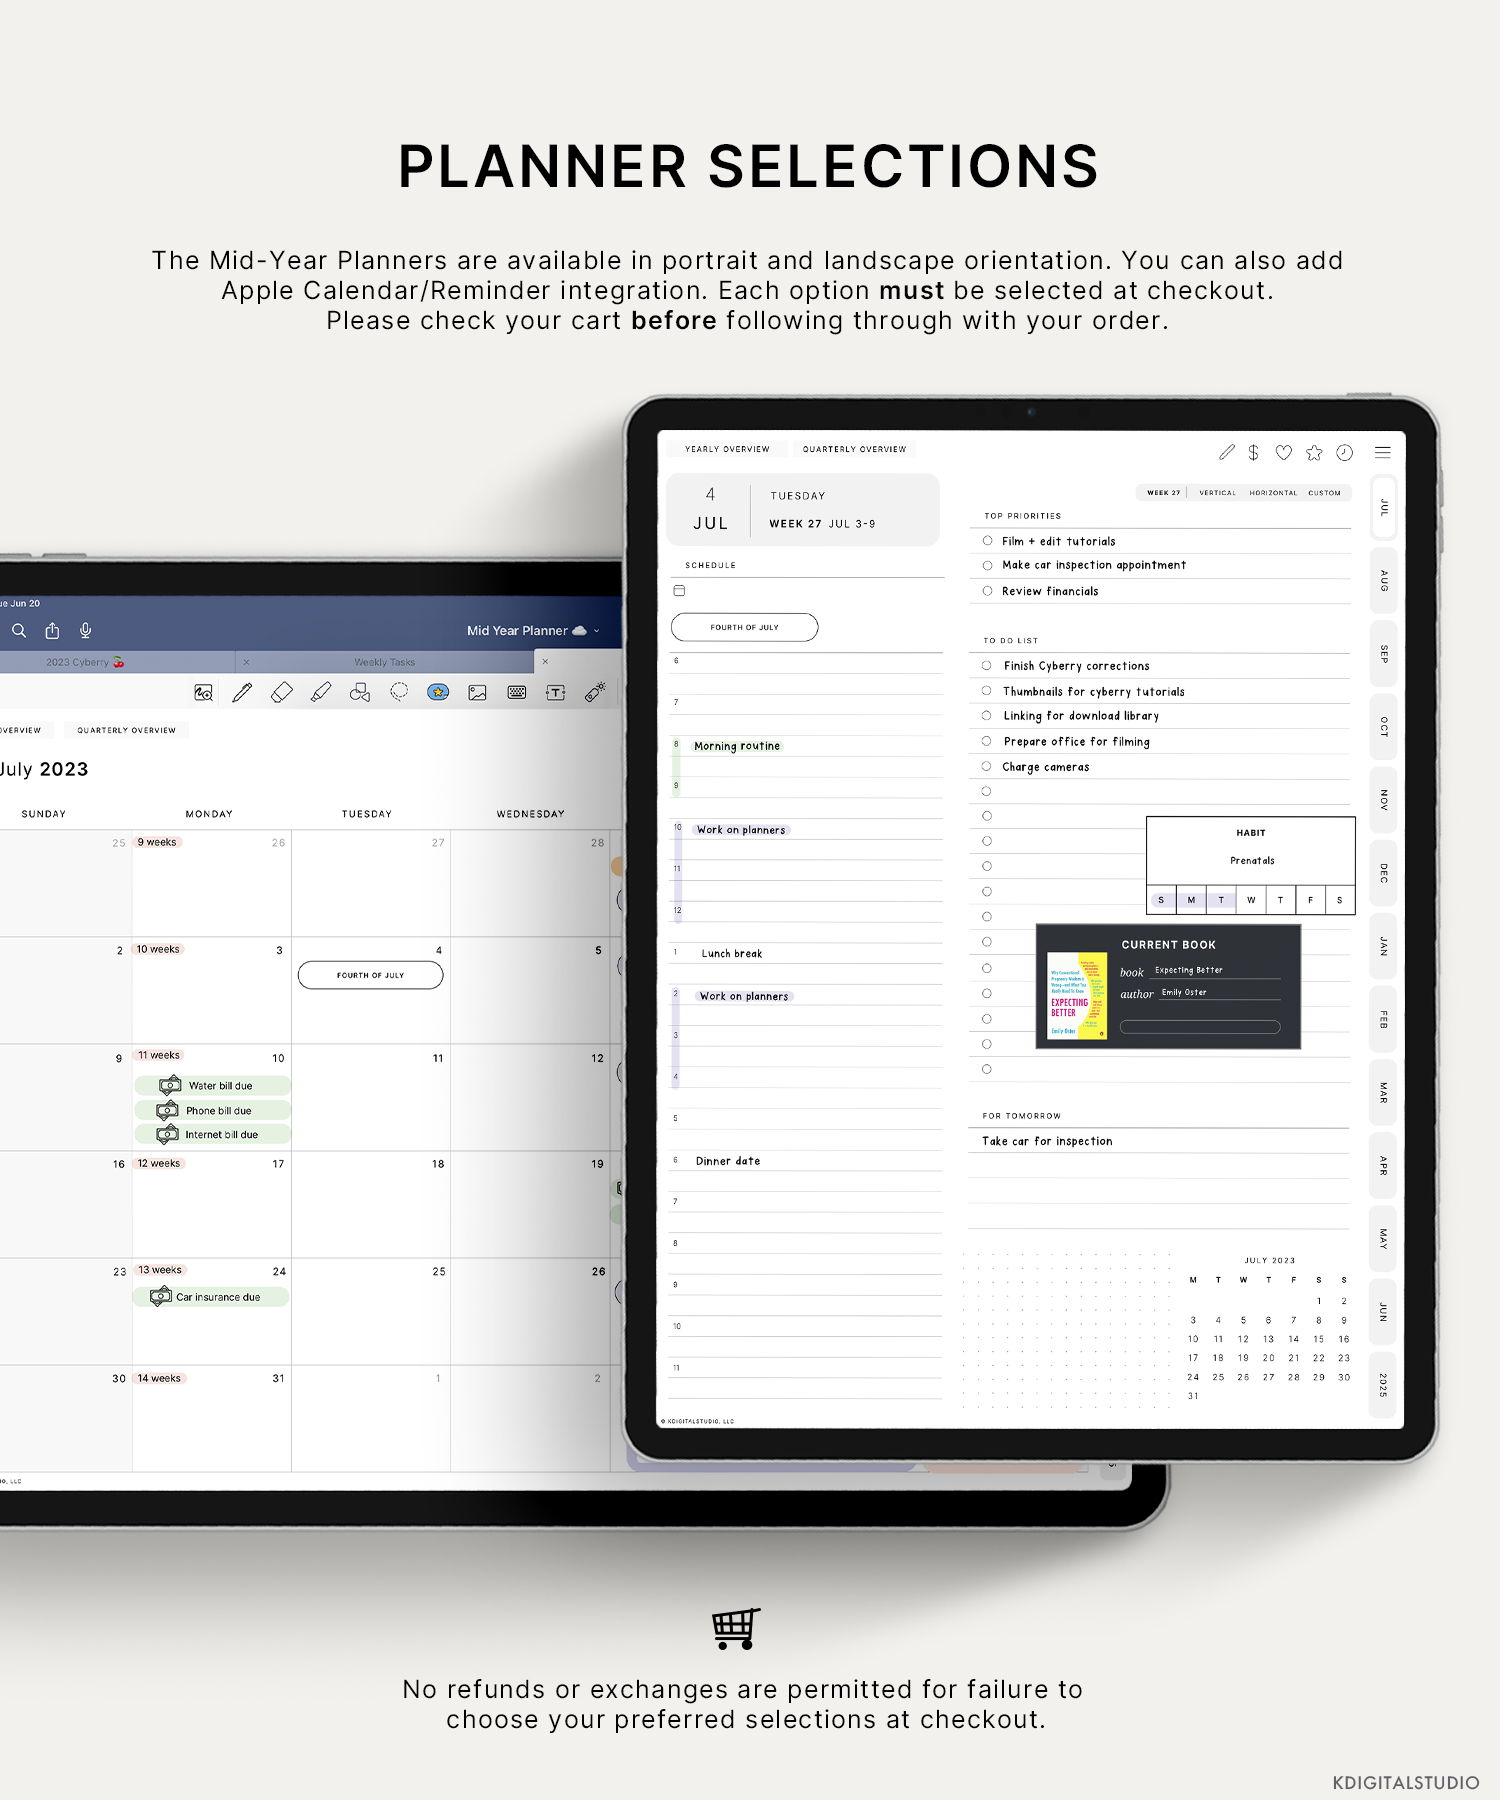 The Mid-Year Planners are available in portrait and landscape orientations. You can also add Apple Calendar.Reminder integration. Each option must be selected at checkout. Please check your cart before following through with your order. No refunds or exchanges are permitted for failure to choose your preferred selections at checkout.